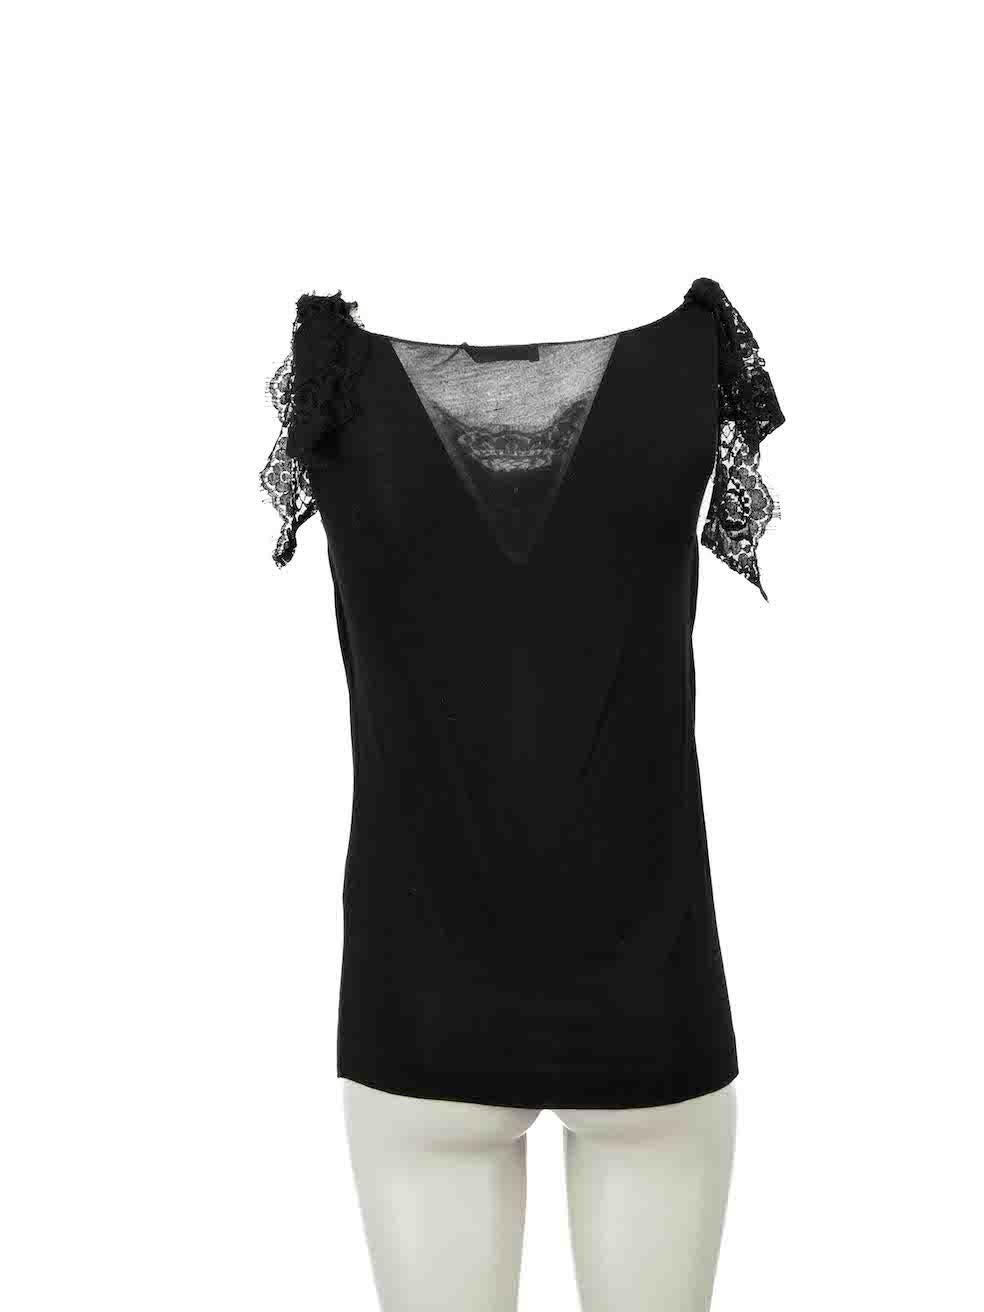 Dolce & Gabbana Black Cowl Neck Lace Trim Tank Top Size XS In Excellent Condition For Sale In London, GB